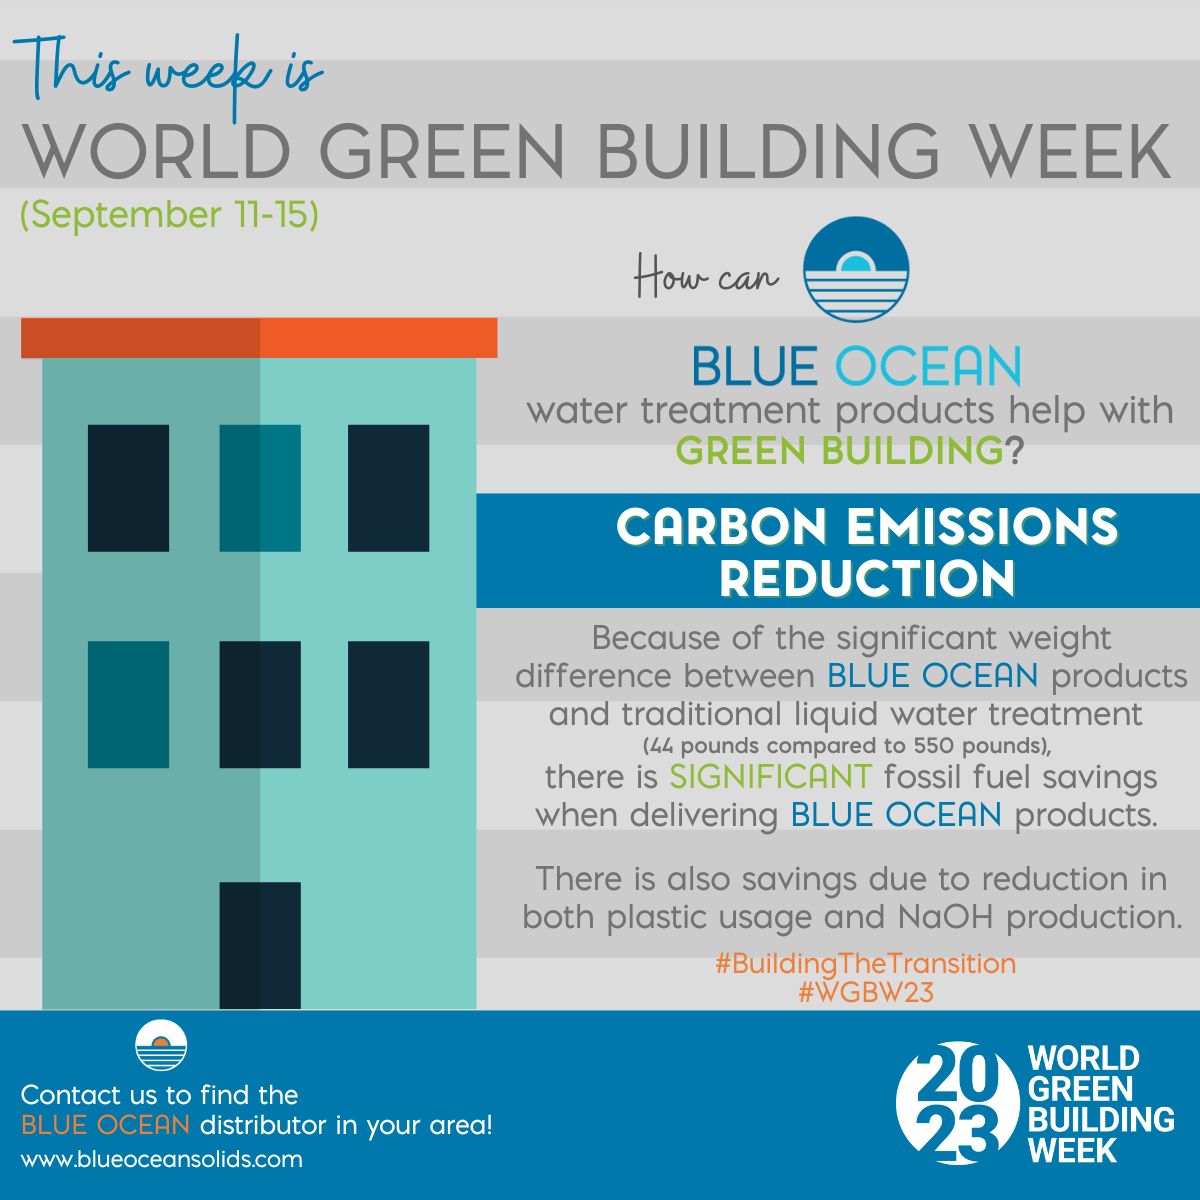 Welcome to @WorldGBCs World Green Building Week – Day 3!
 
Blue Ocean’s SOLID water treatment products can help REDUCE CARBON EMISSIONS! Because of the significant weight difference between...

#BuildingTheTransition
#WGBW23
#BePartOfTheSolution

linkedin.com/posts/blue-oce…